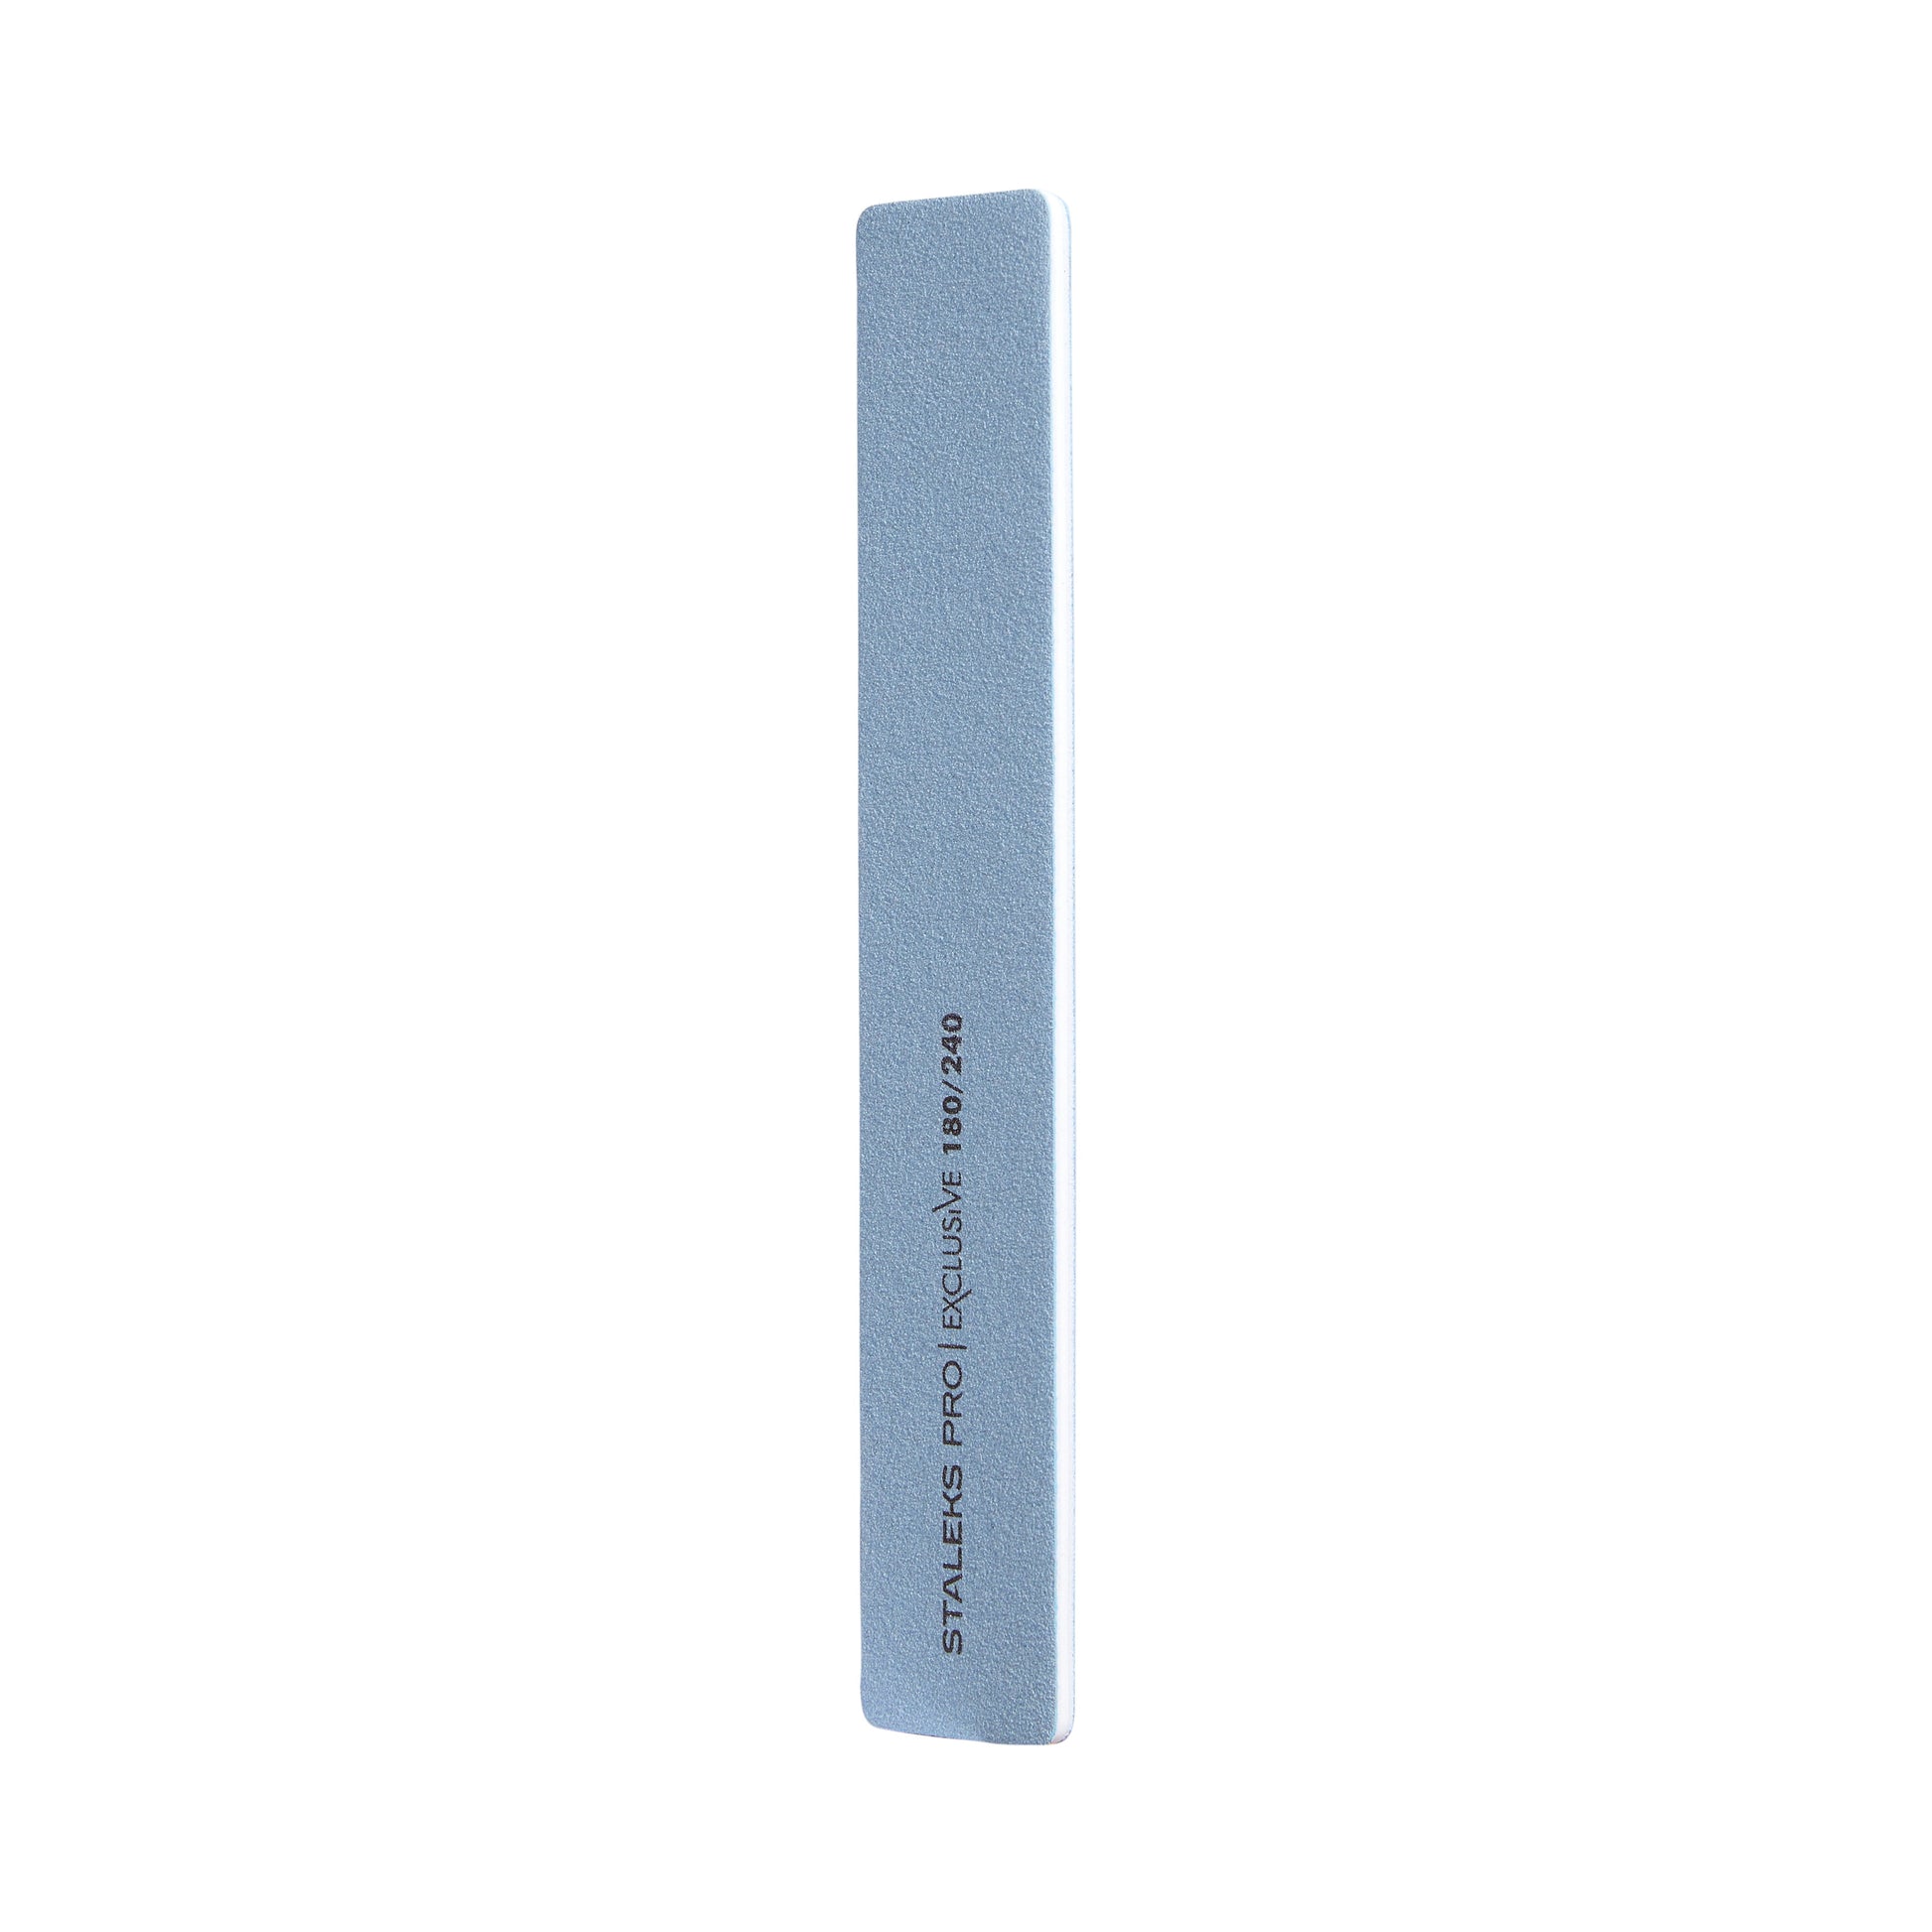 STALEKS-180/240grit Mineral straight nail file EXCLUSIVE-2